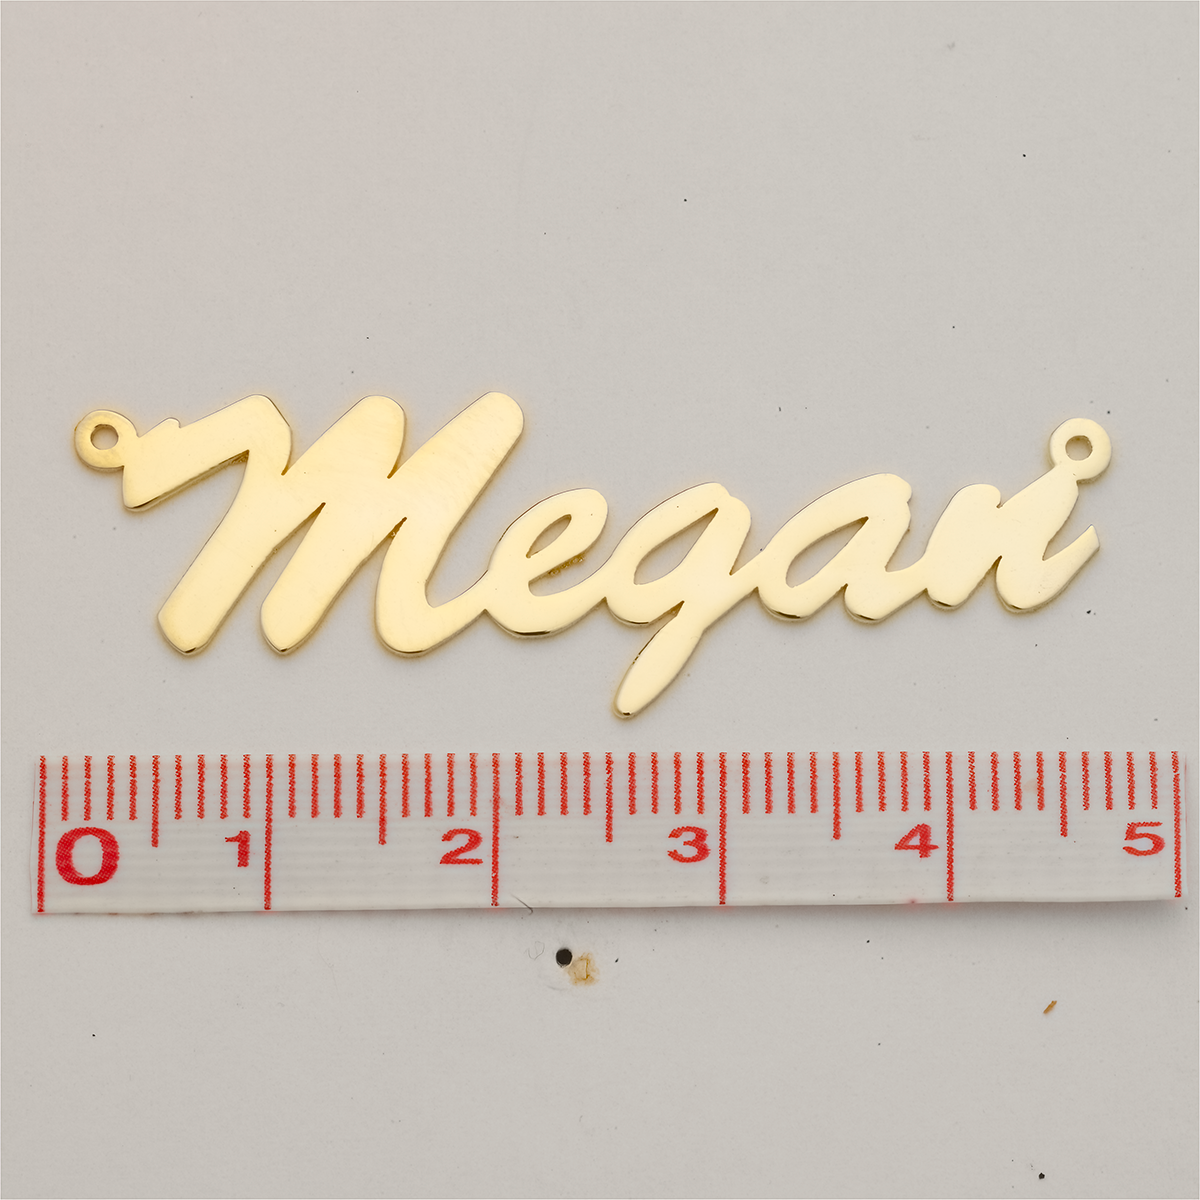 Cursive Nameplate Necklace Style 1